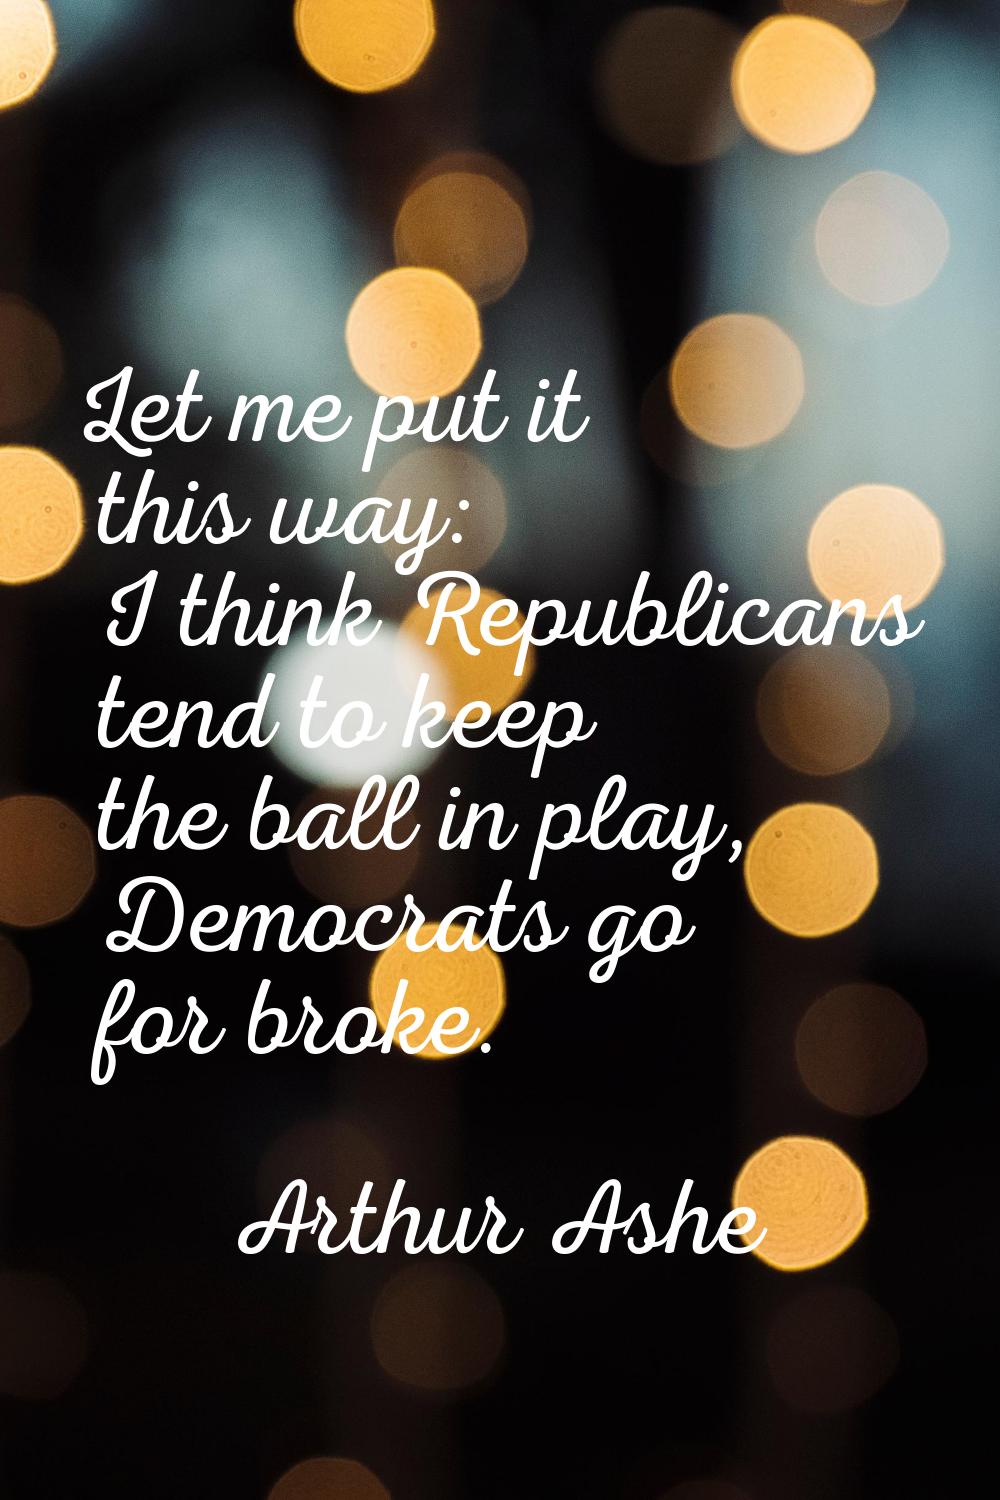 Let me put it this way: I think Republicans tend to keep the ball in play, Democrats go for broke.